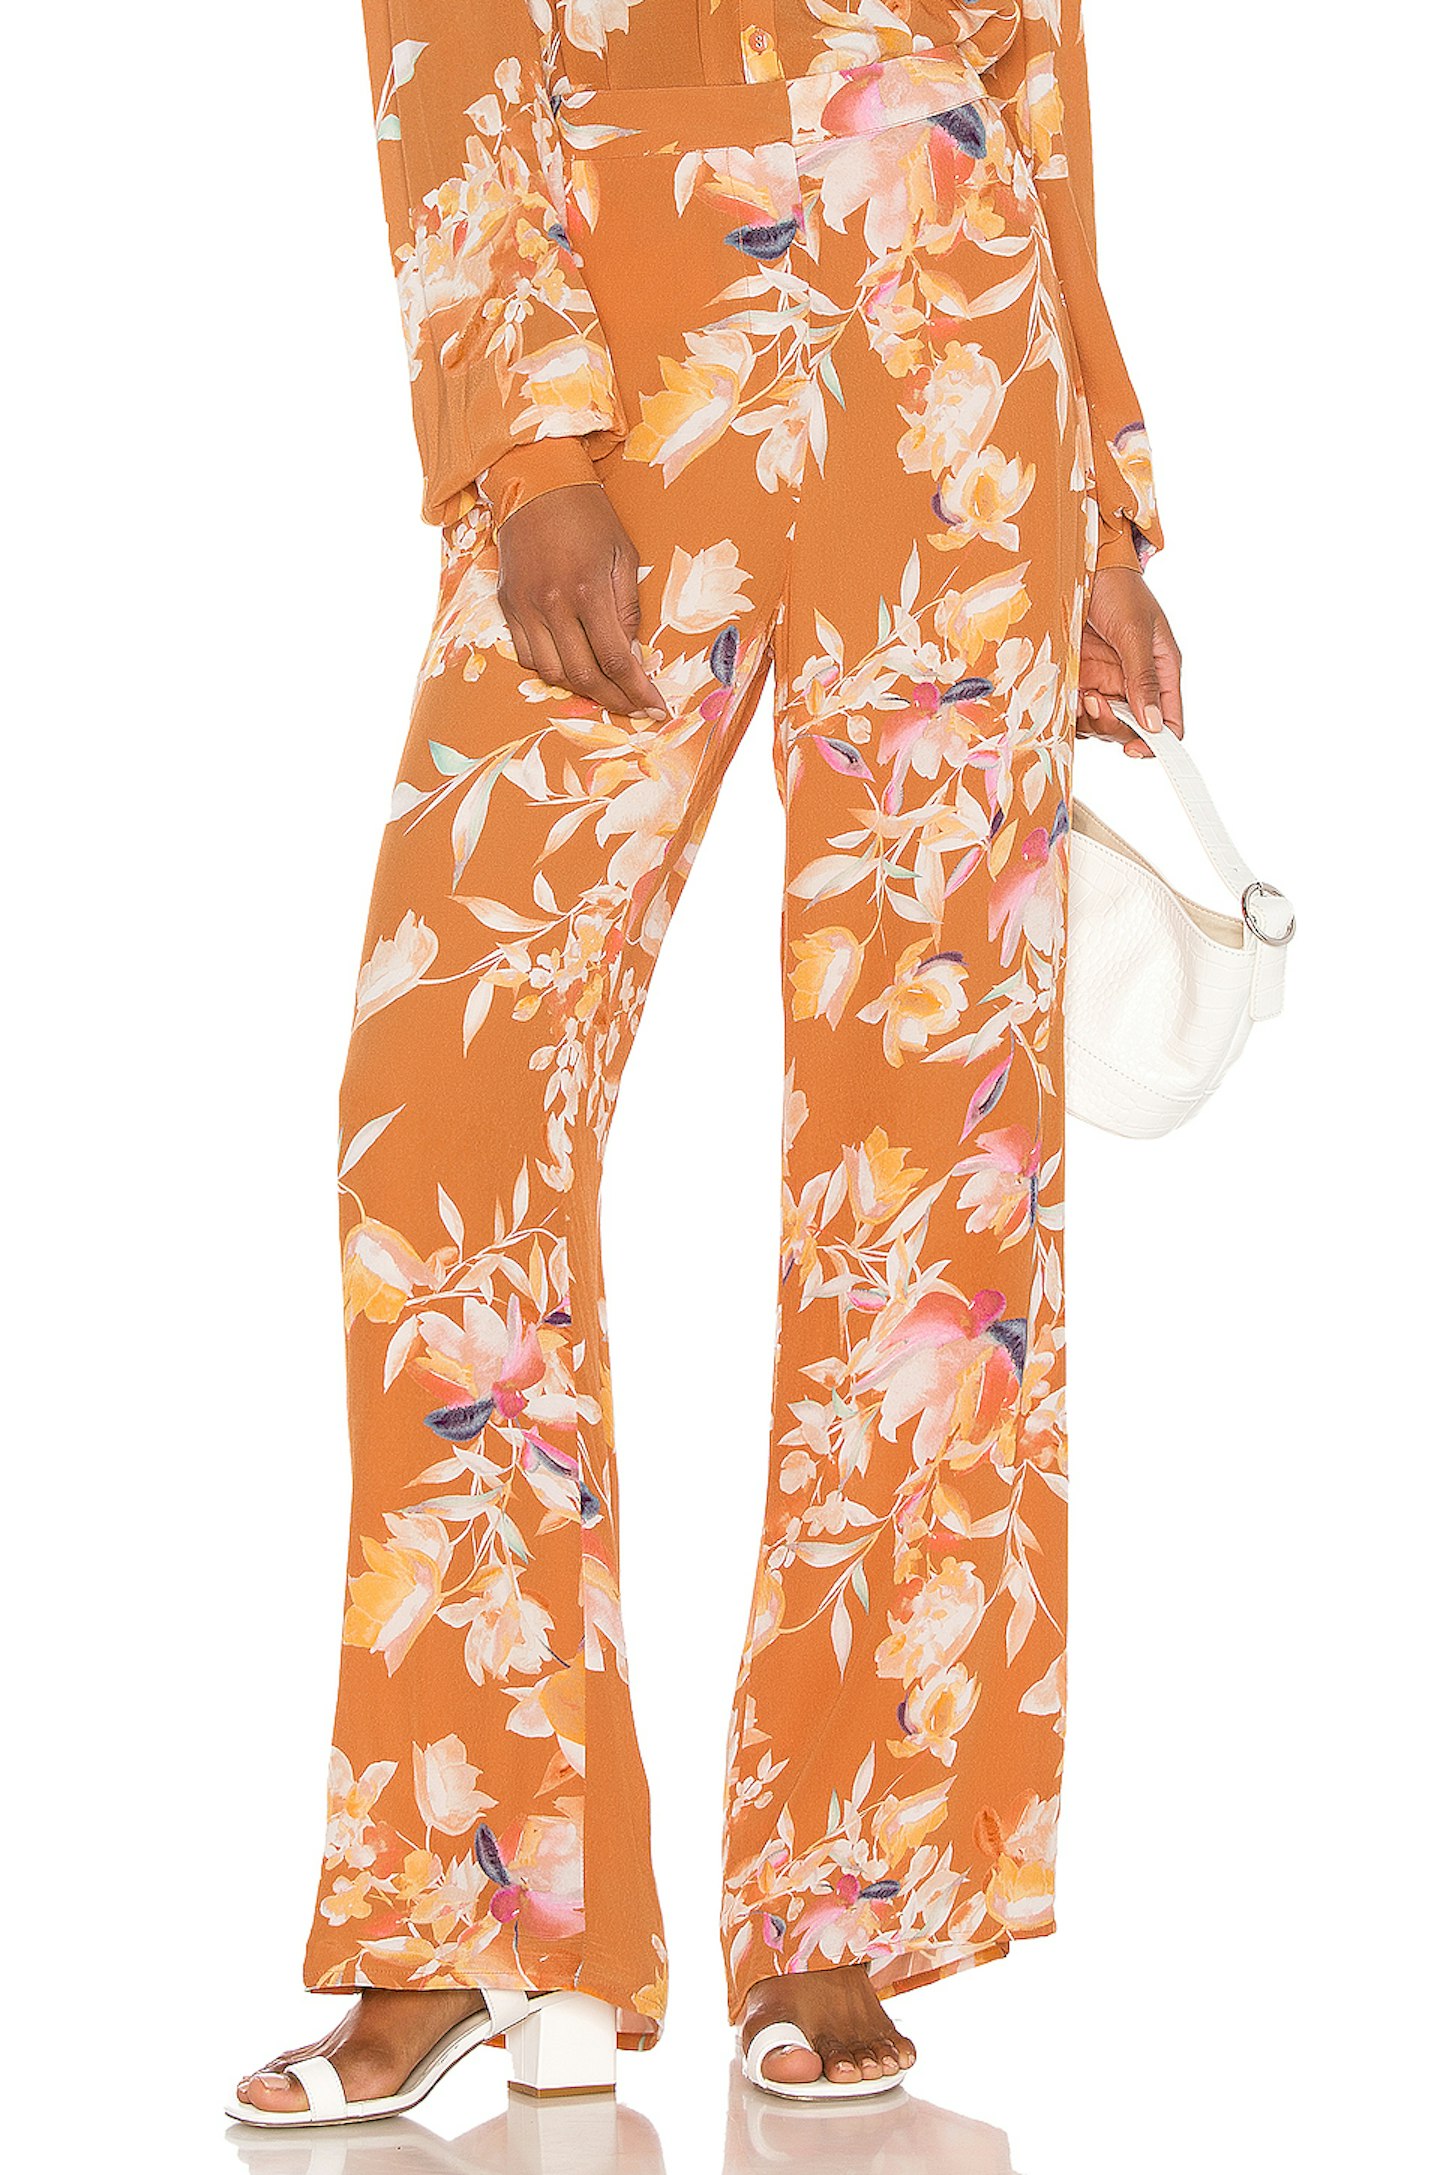 aimee song floral trousers revolve